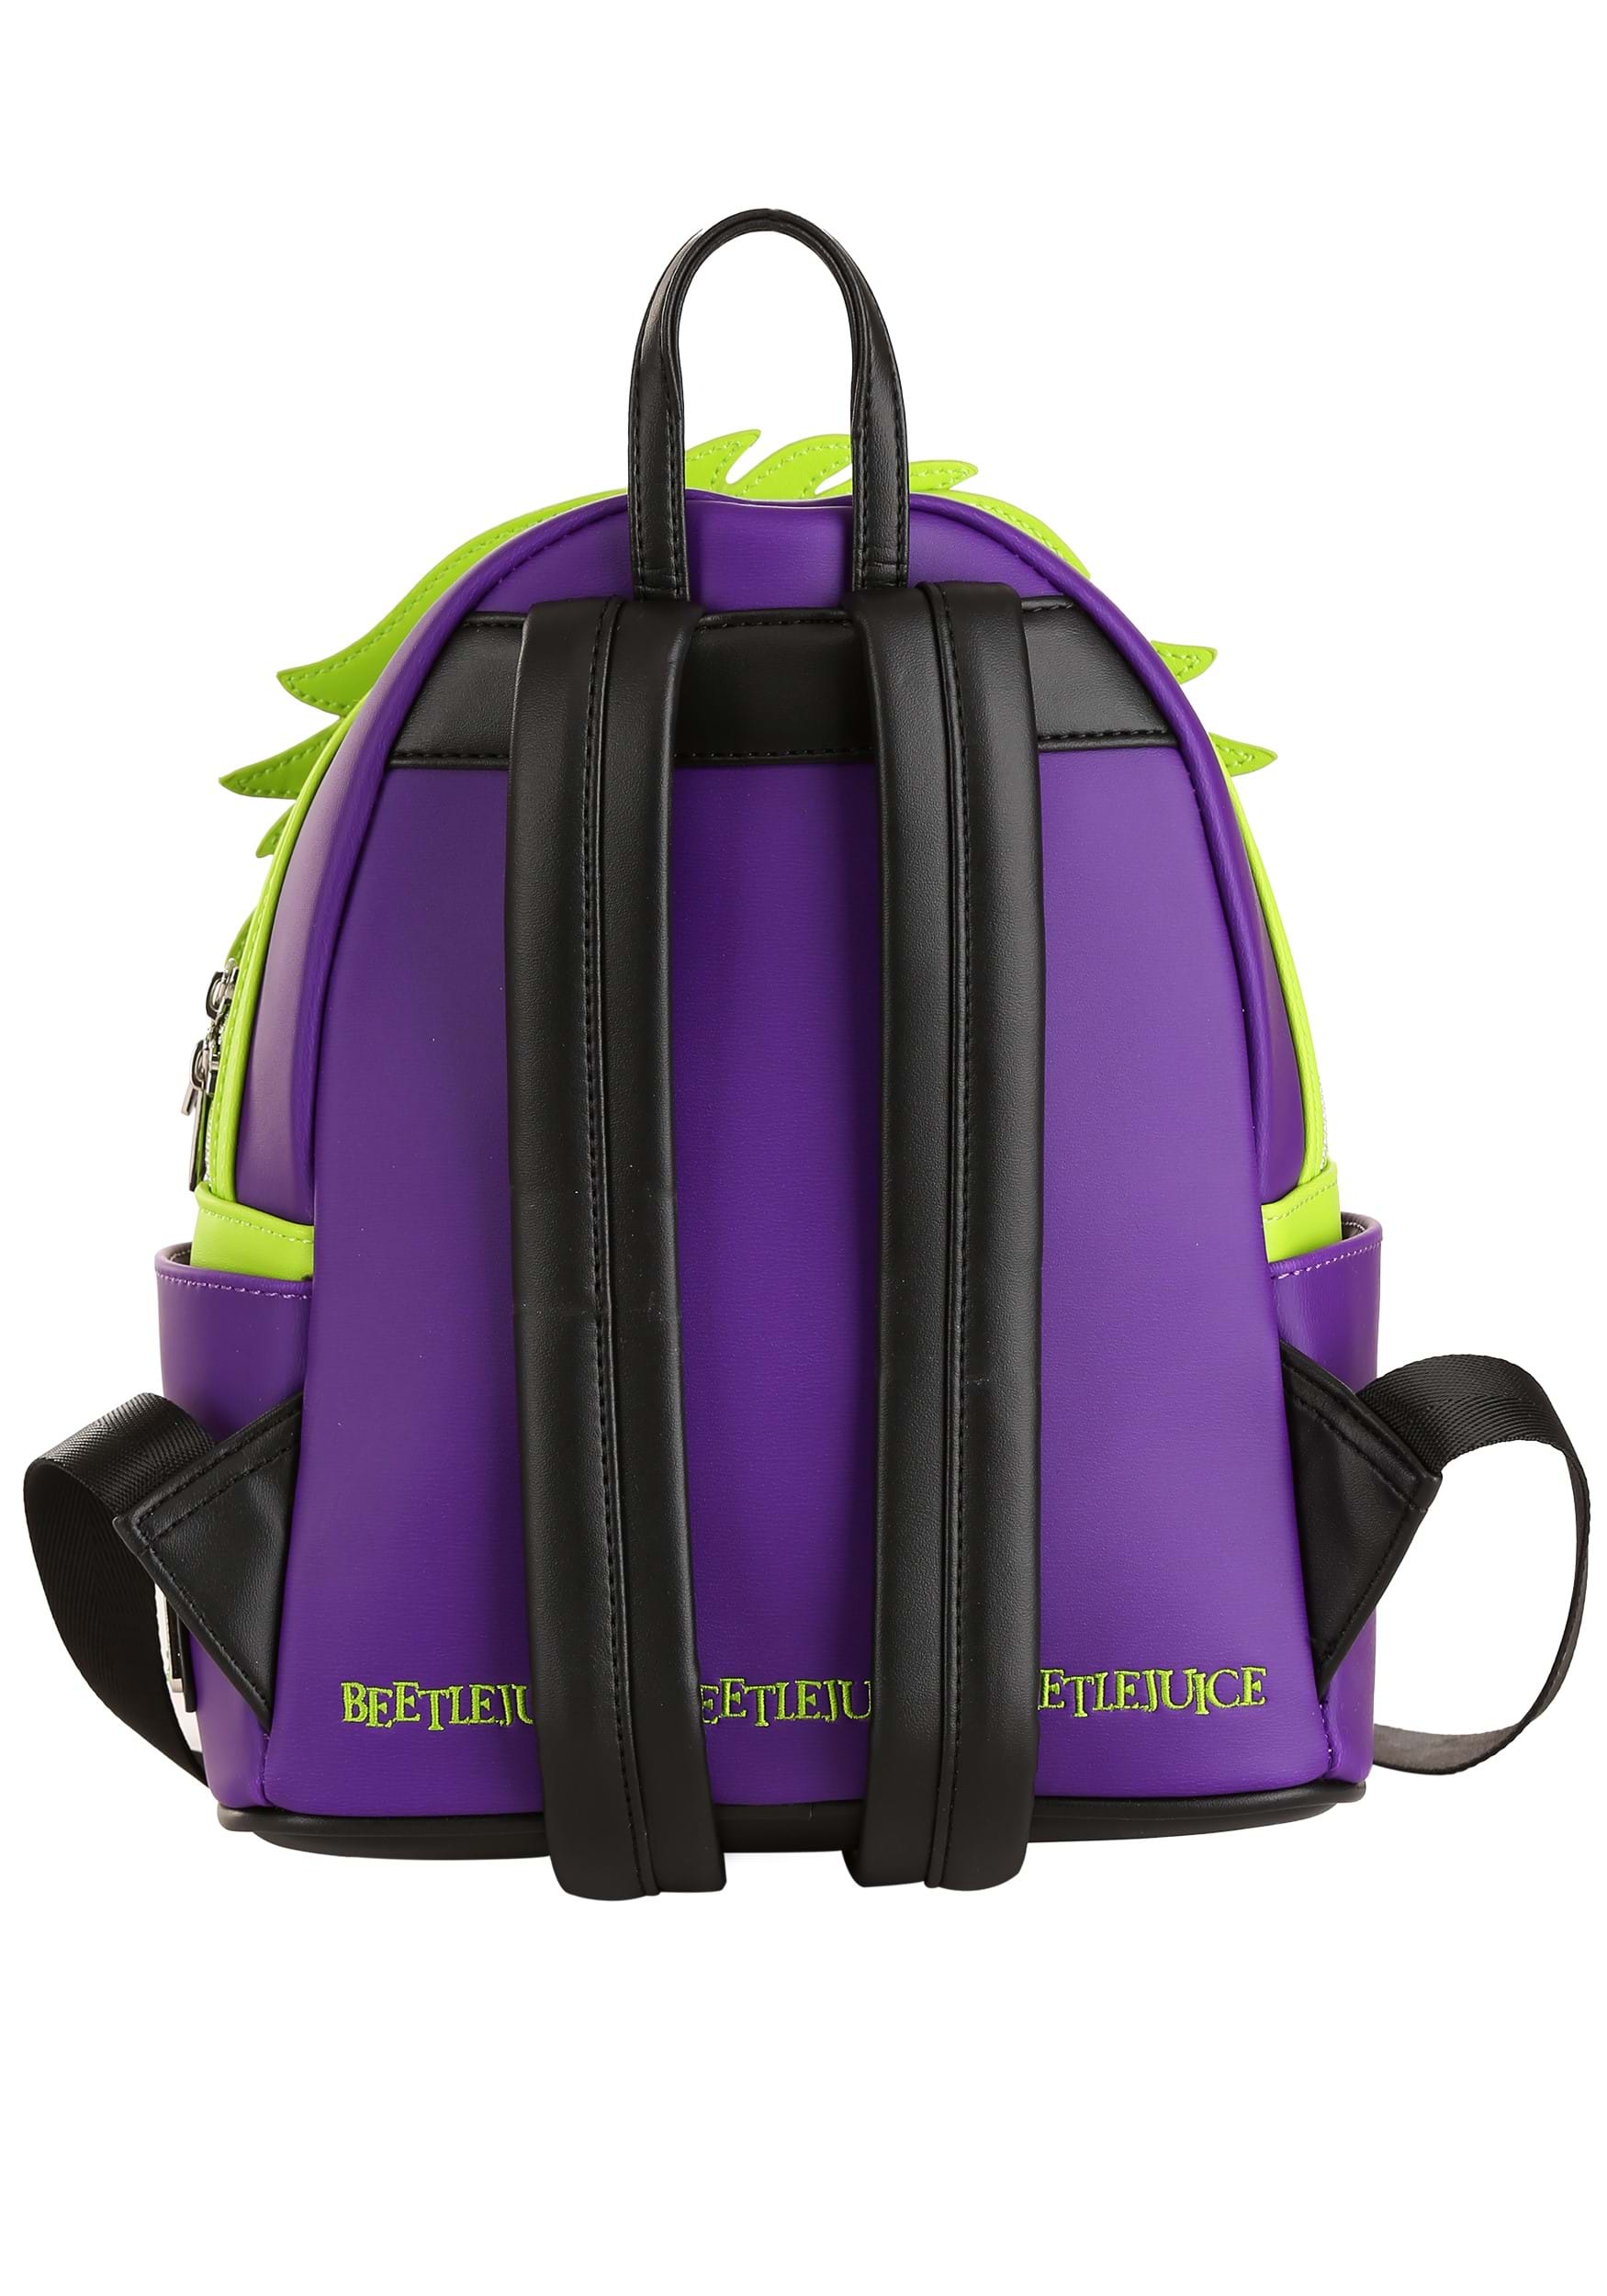 Bags, Two Maleficent Mini Backpacks Loungefly